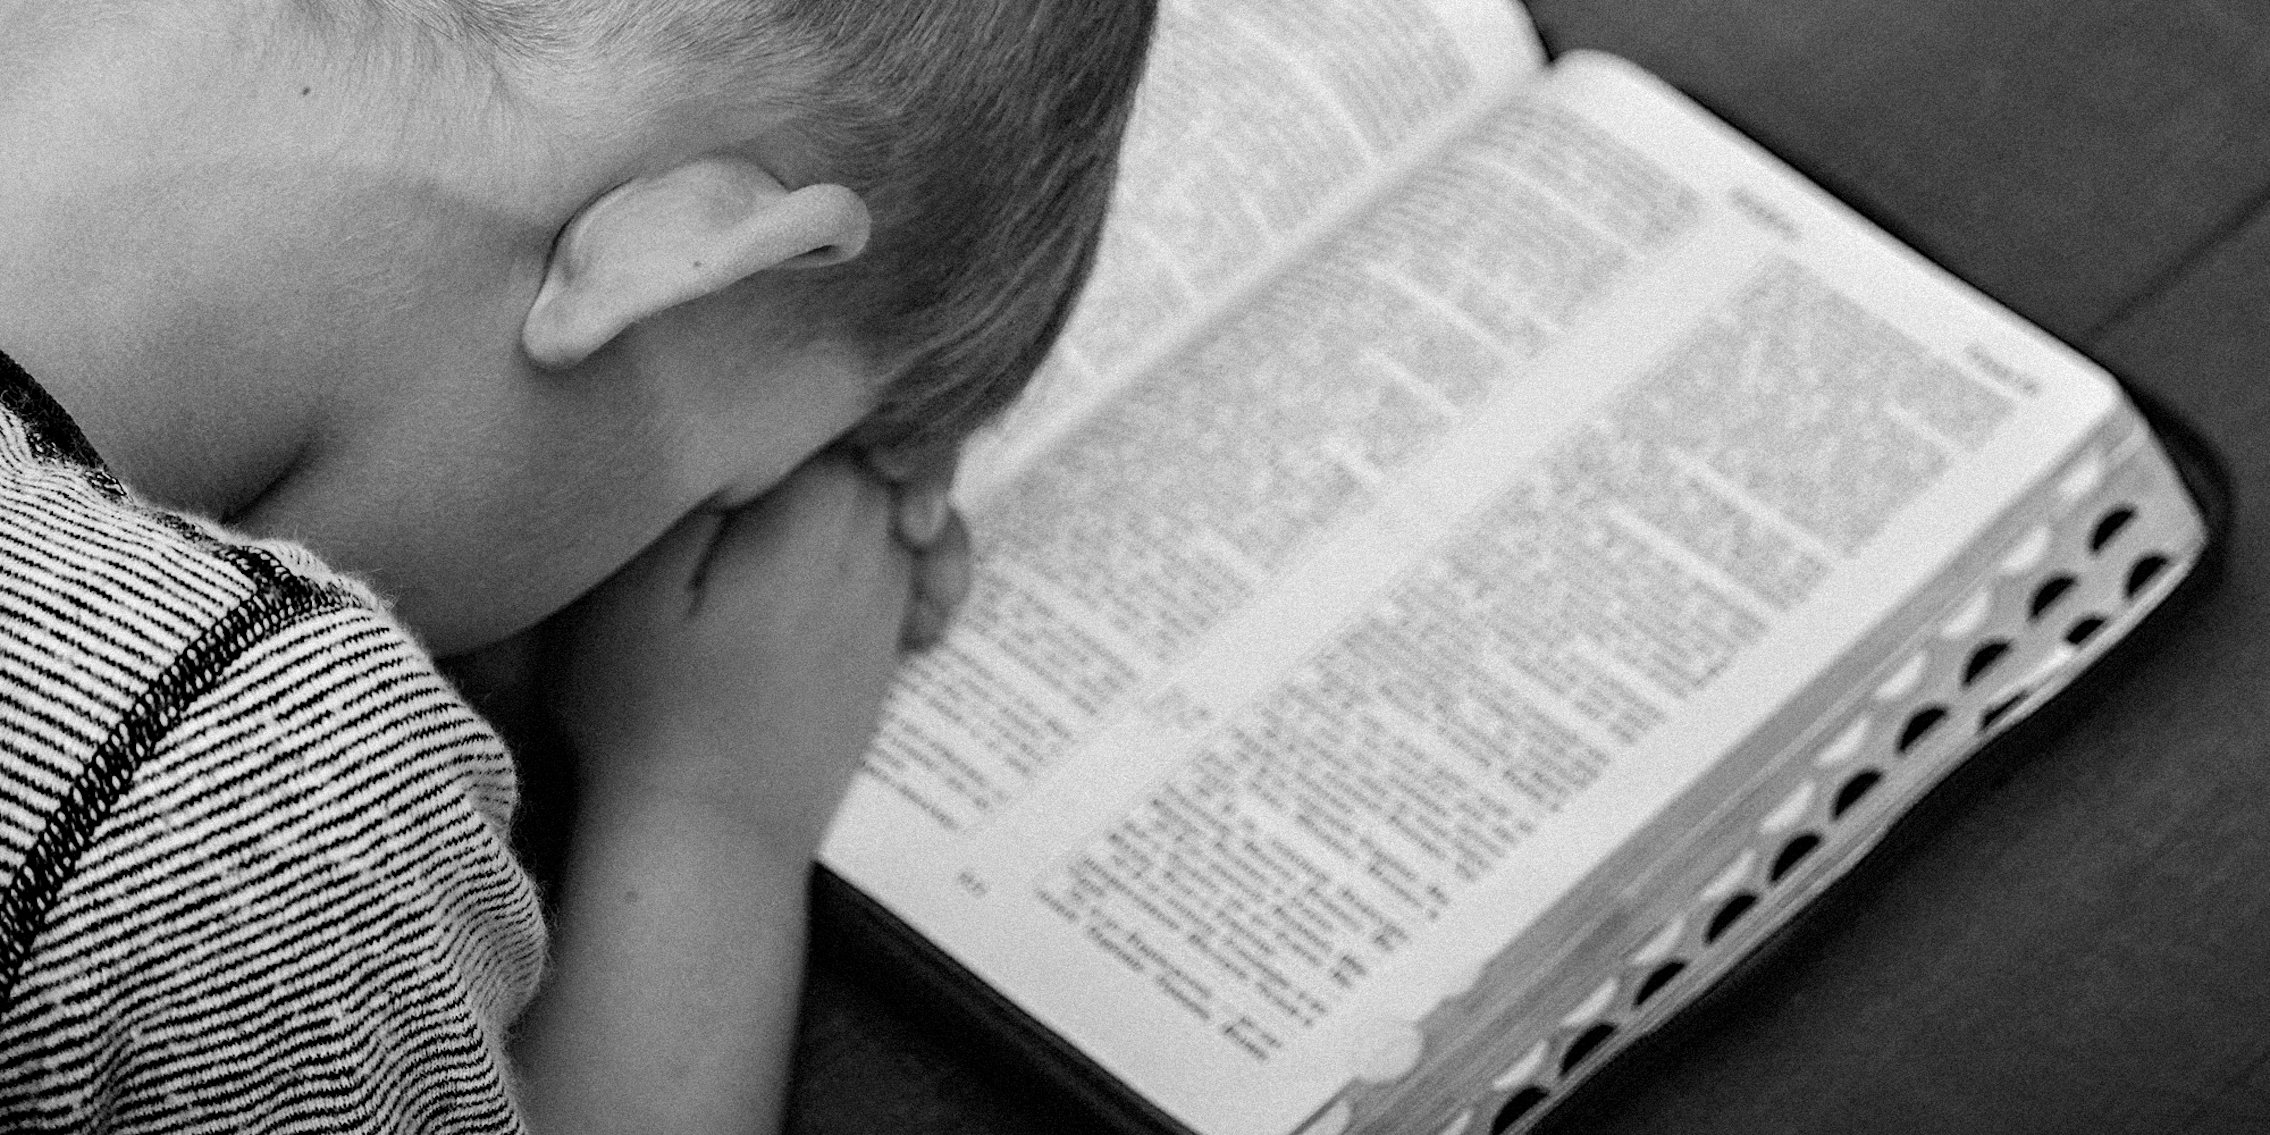 A child prays over open Bible.